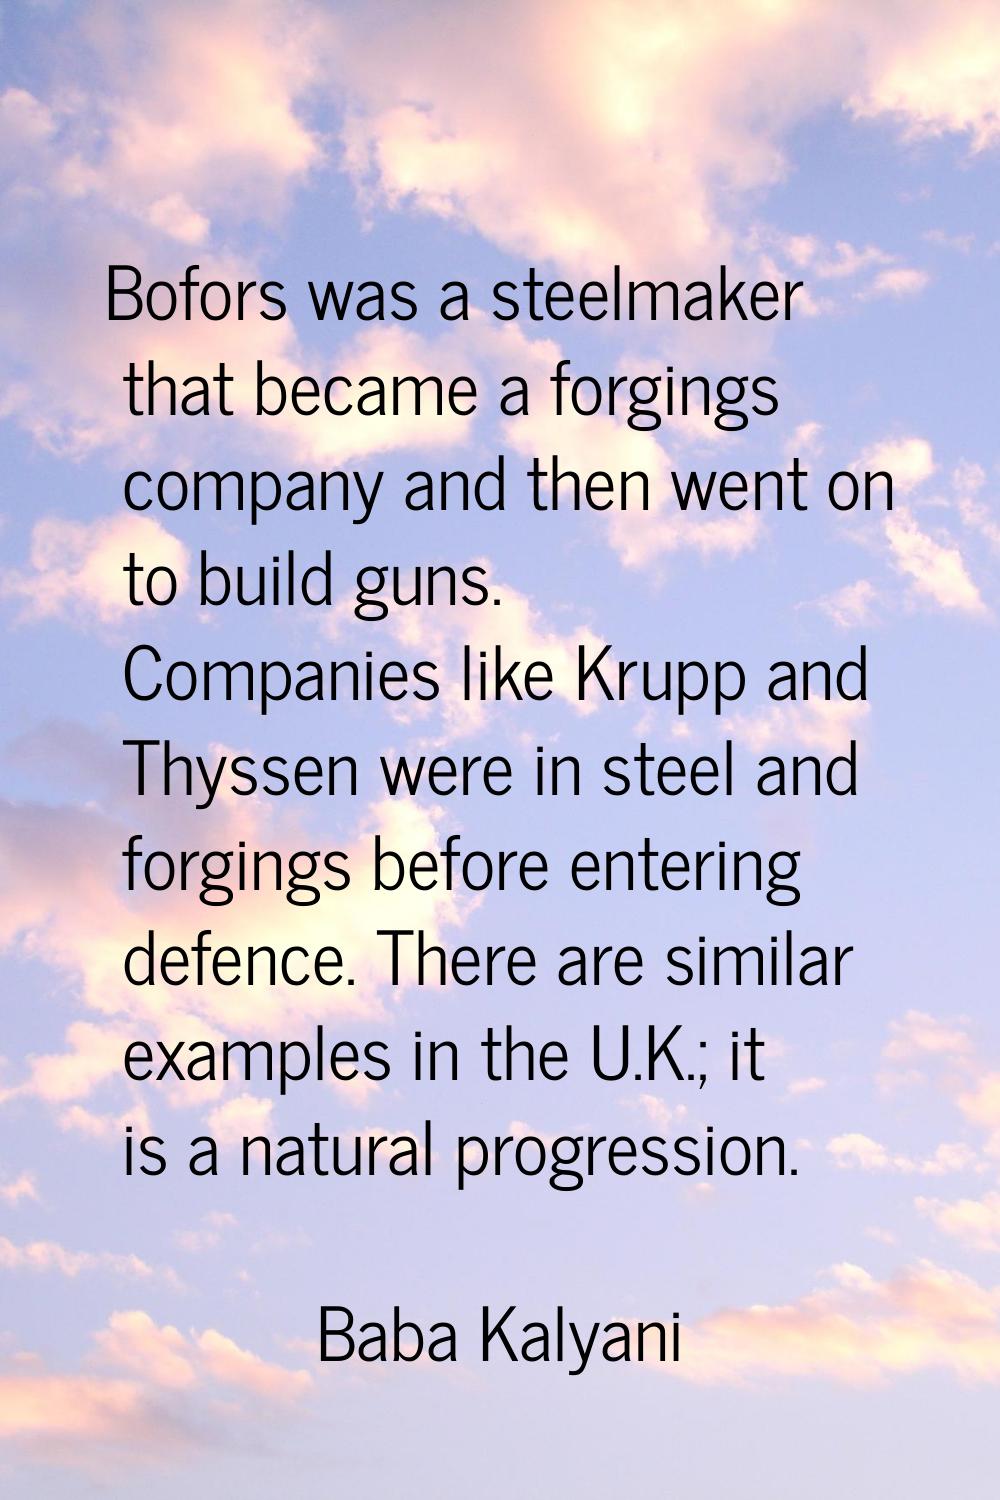 Bofors was a steelmaker that became a forgings company and then went on to build guns. Companies li